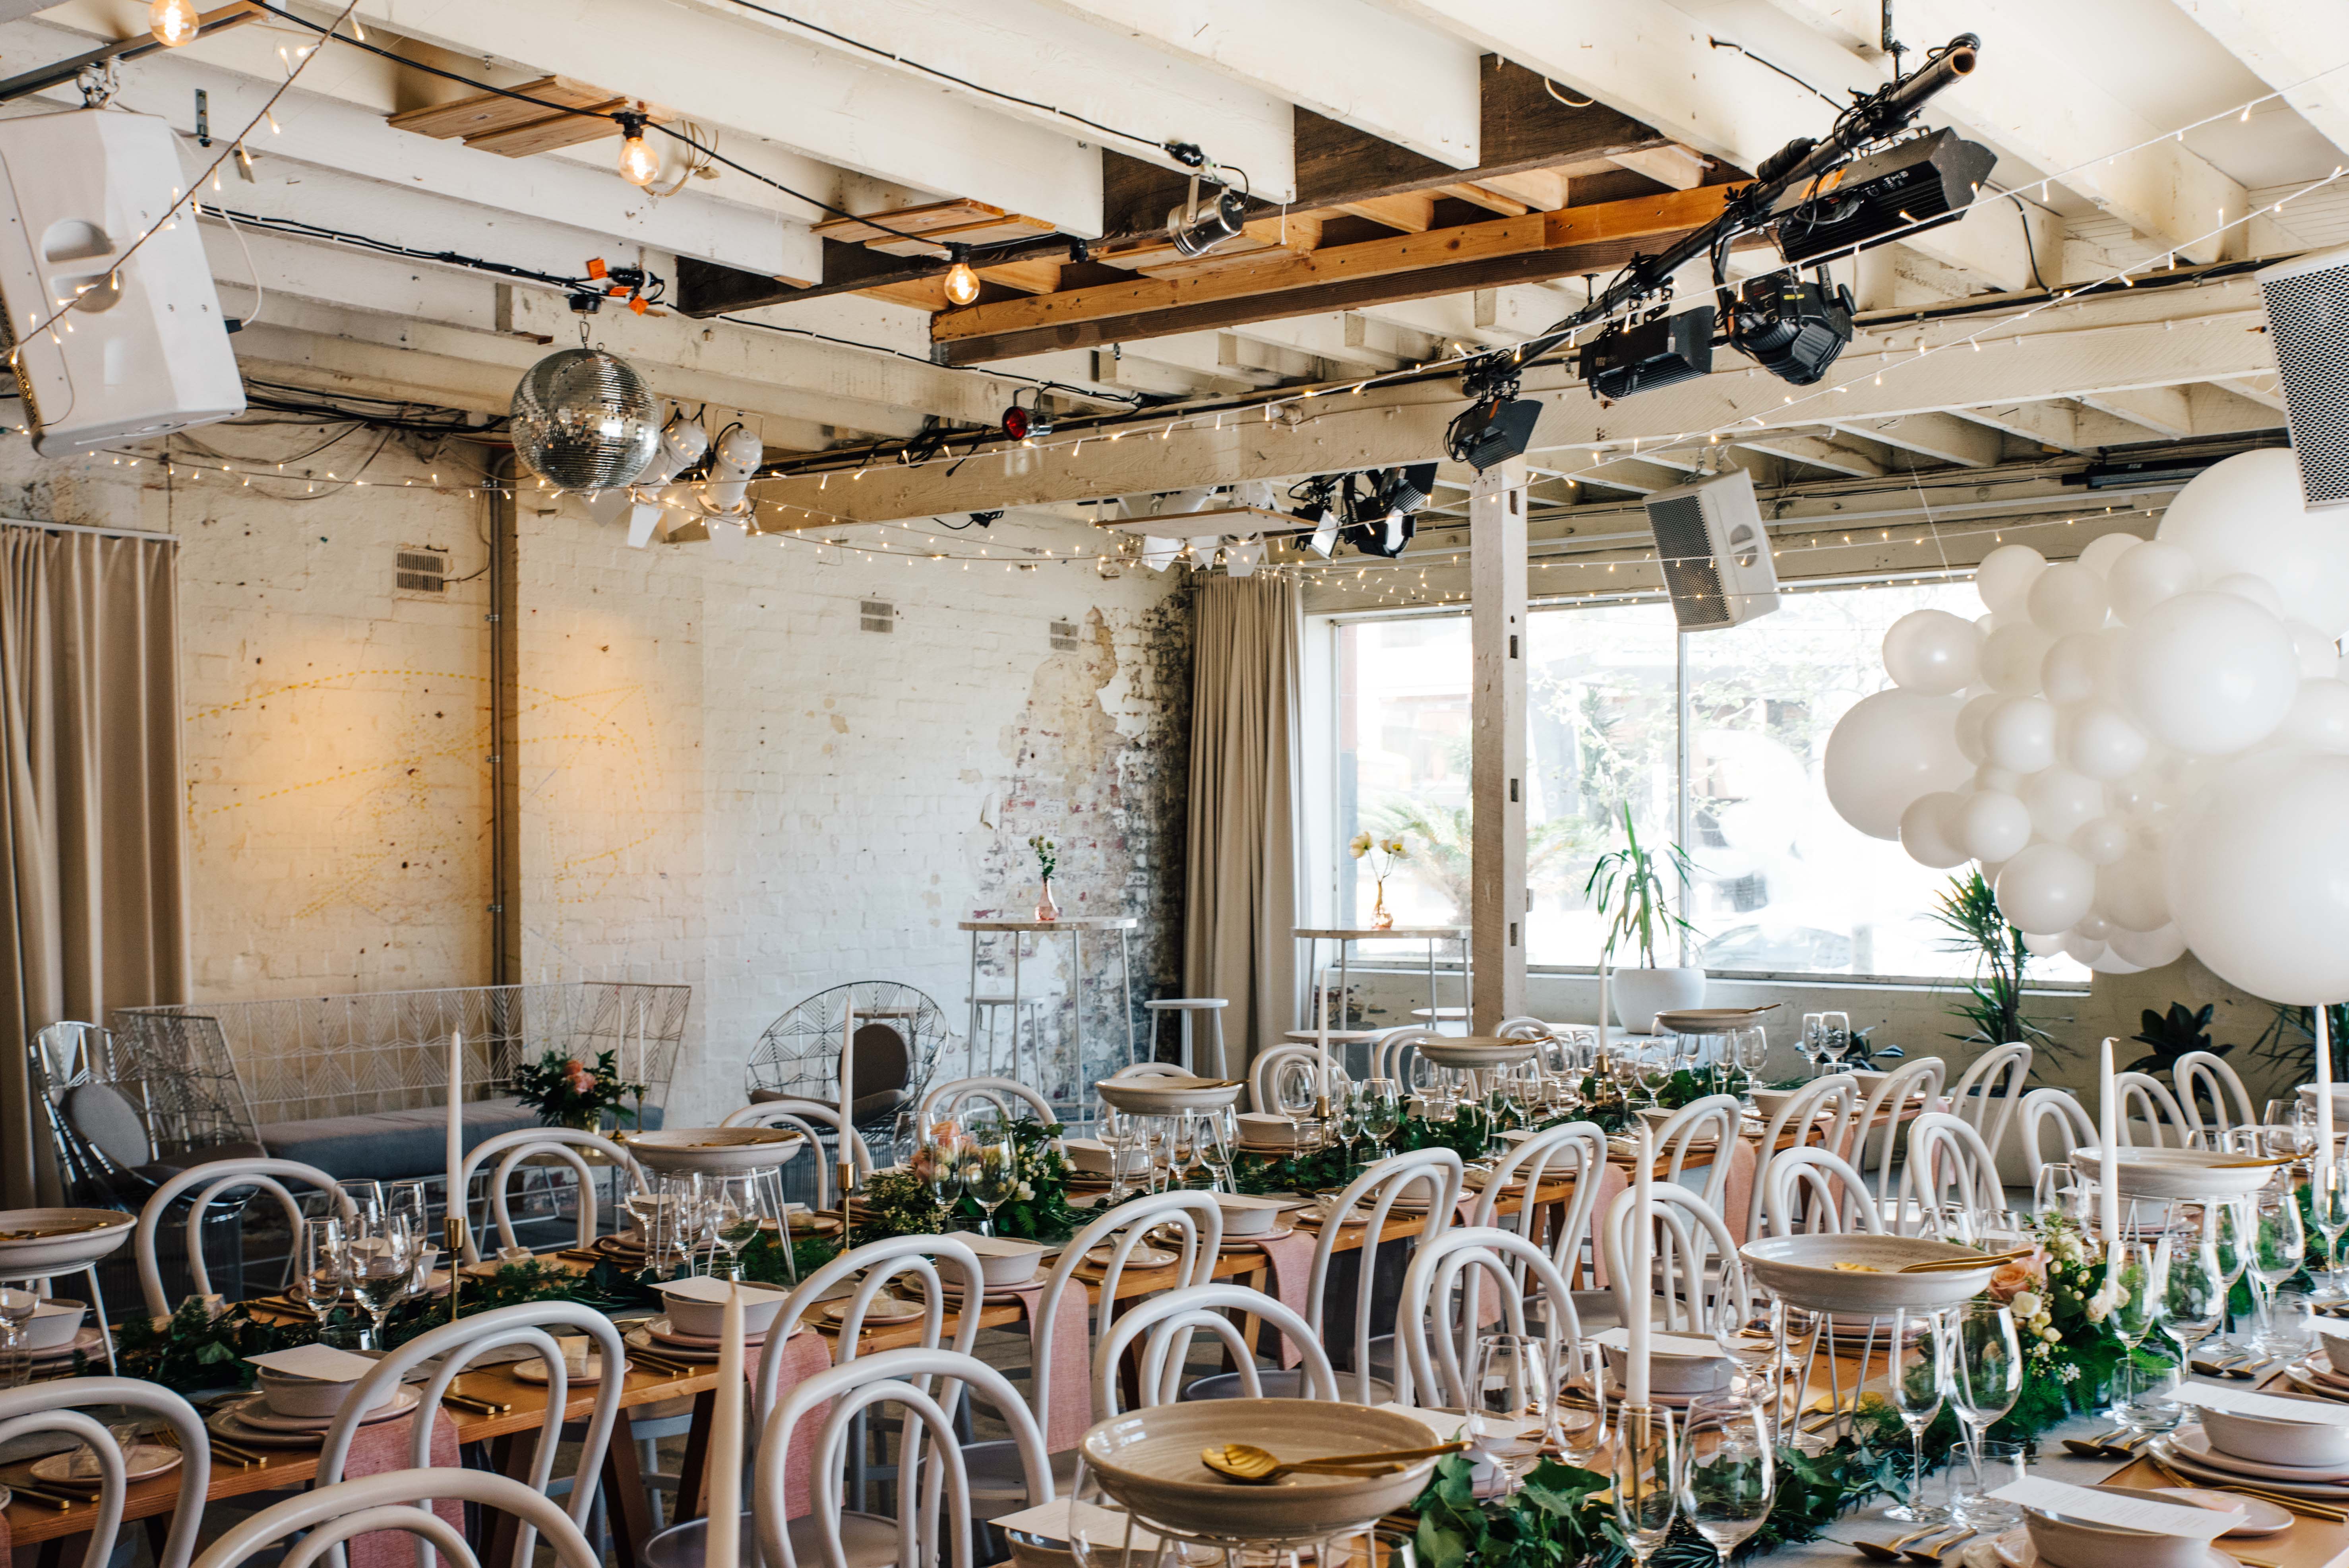 Chateau Apollo, rustic industrial wedding venue in the heart of Adelaide's CBD.